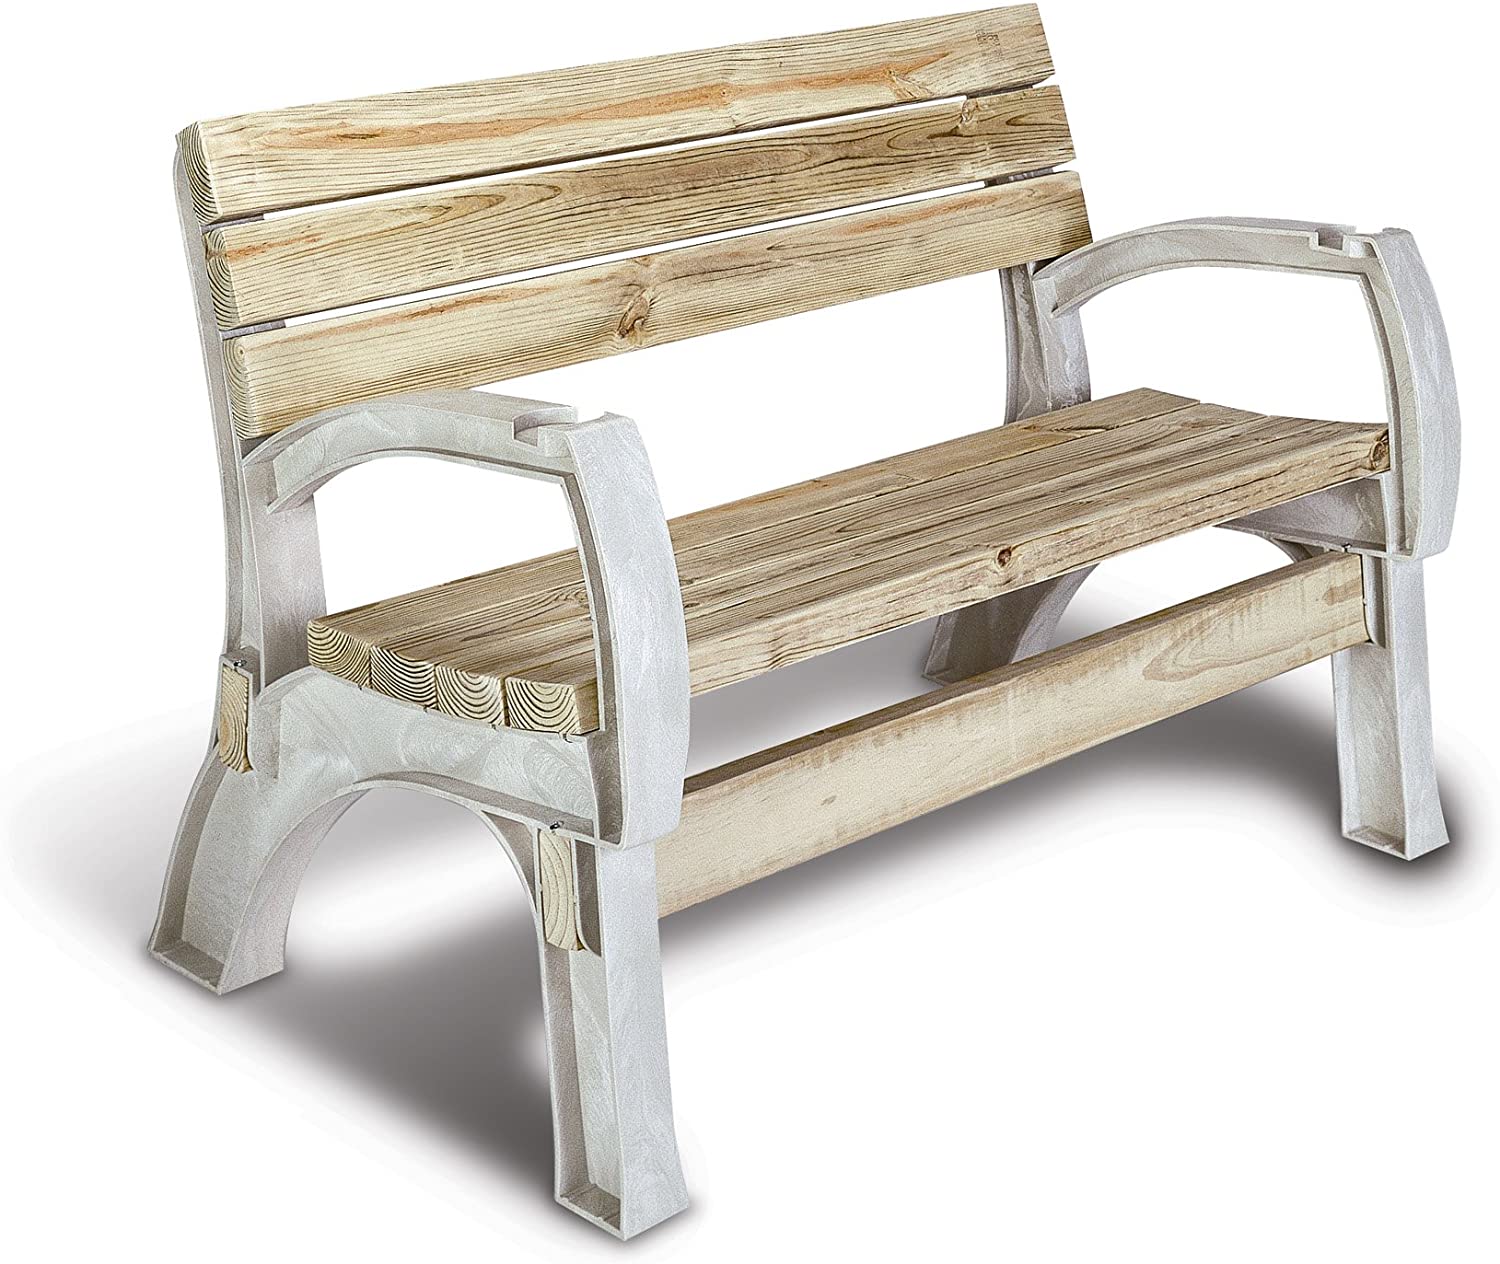 2x4basics 90134ONLMI Custom AnySize Chair or Bench Ends, Sand (lumber not included, only supports)